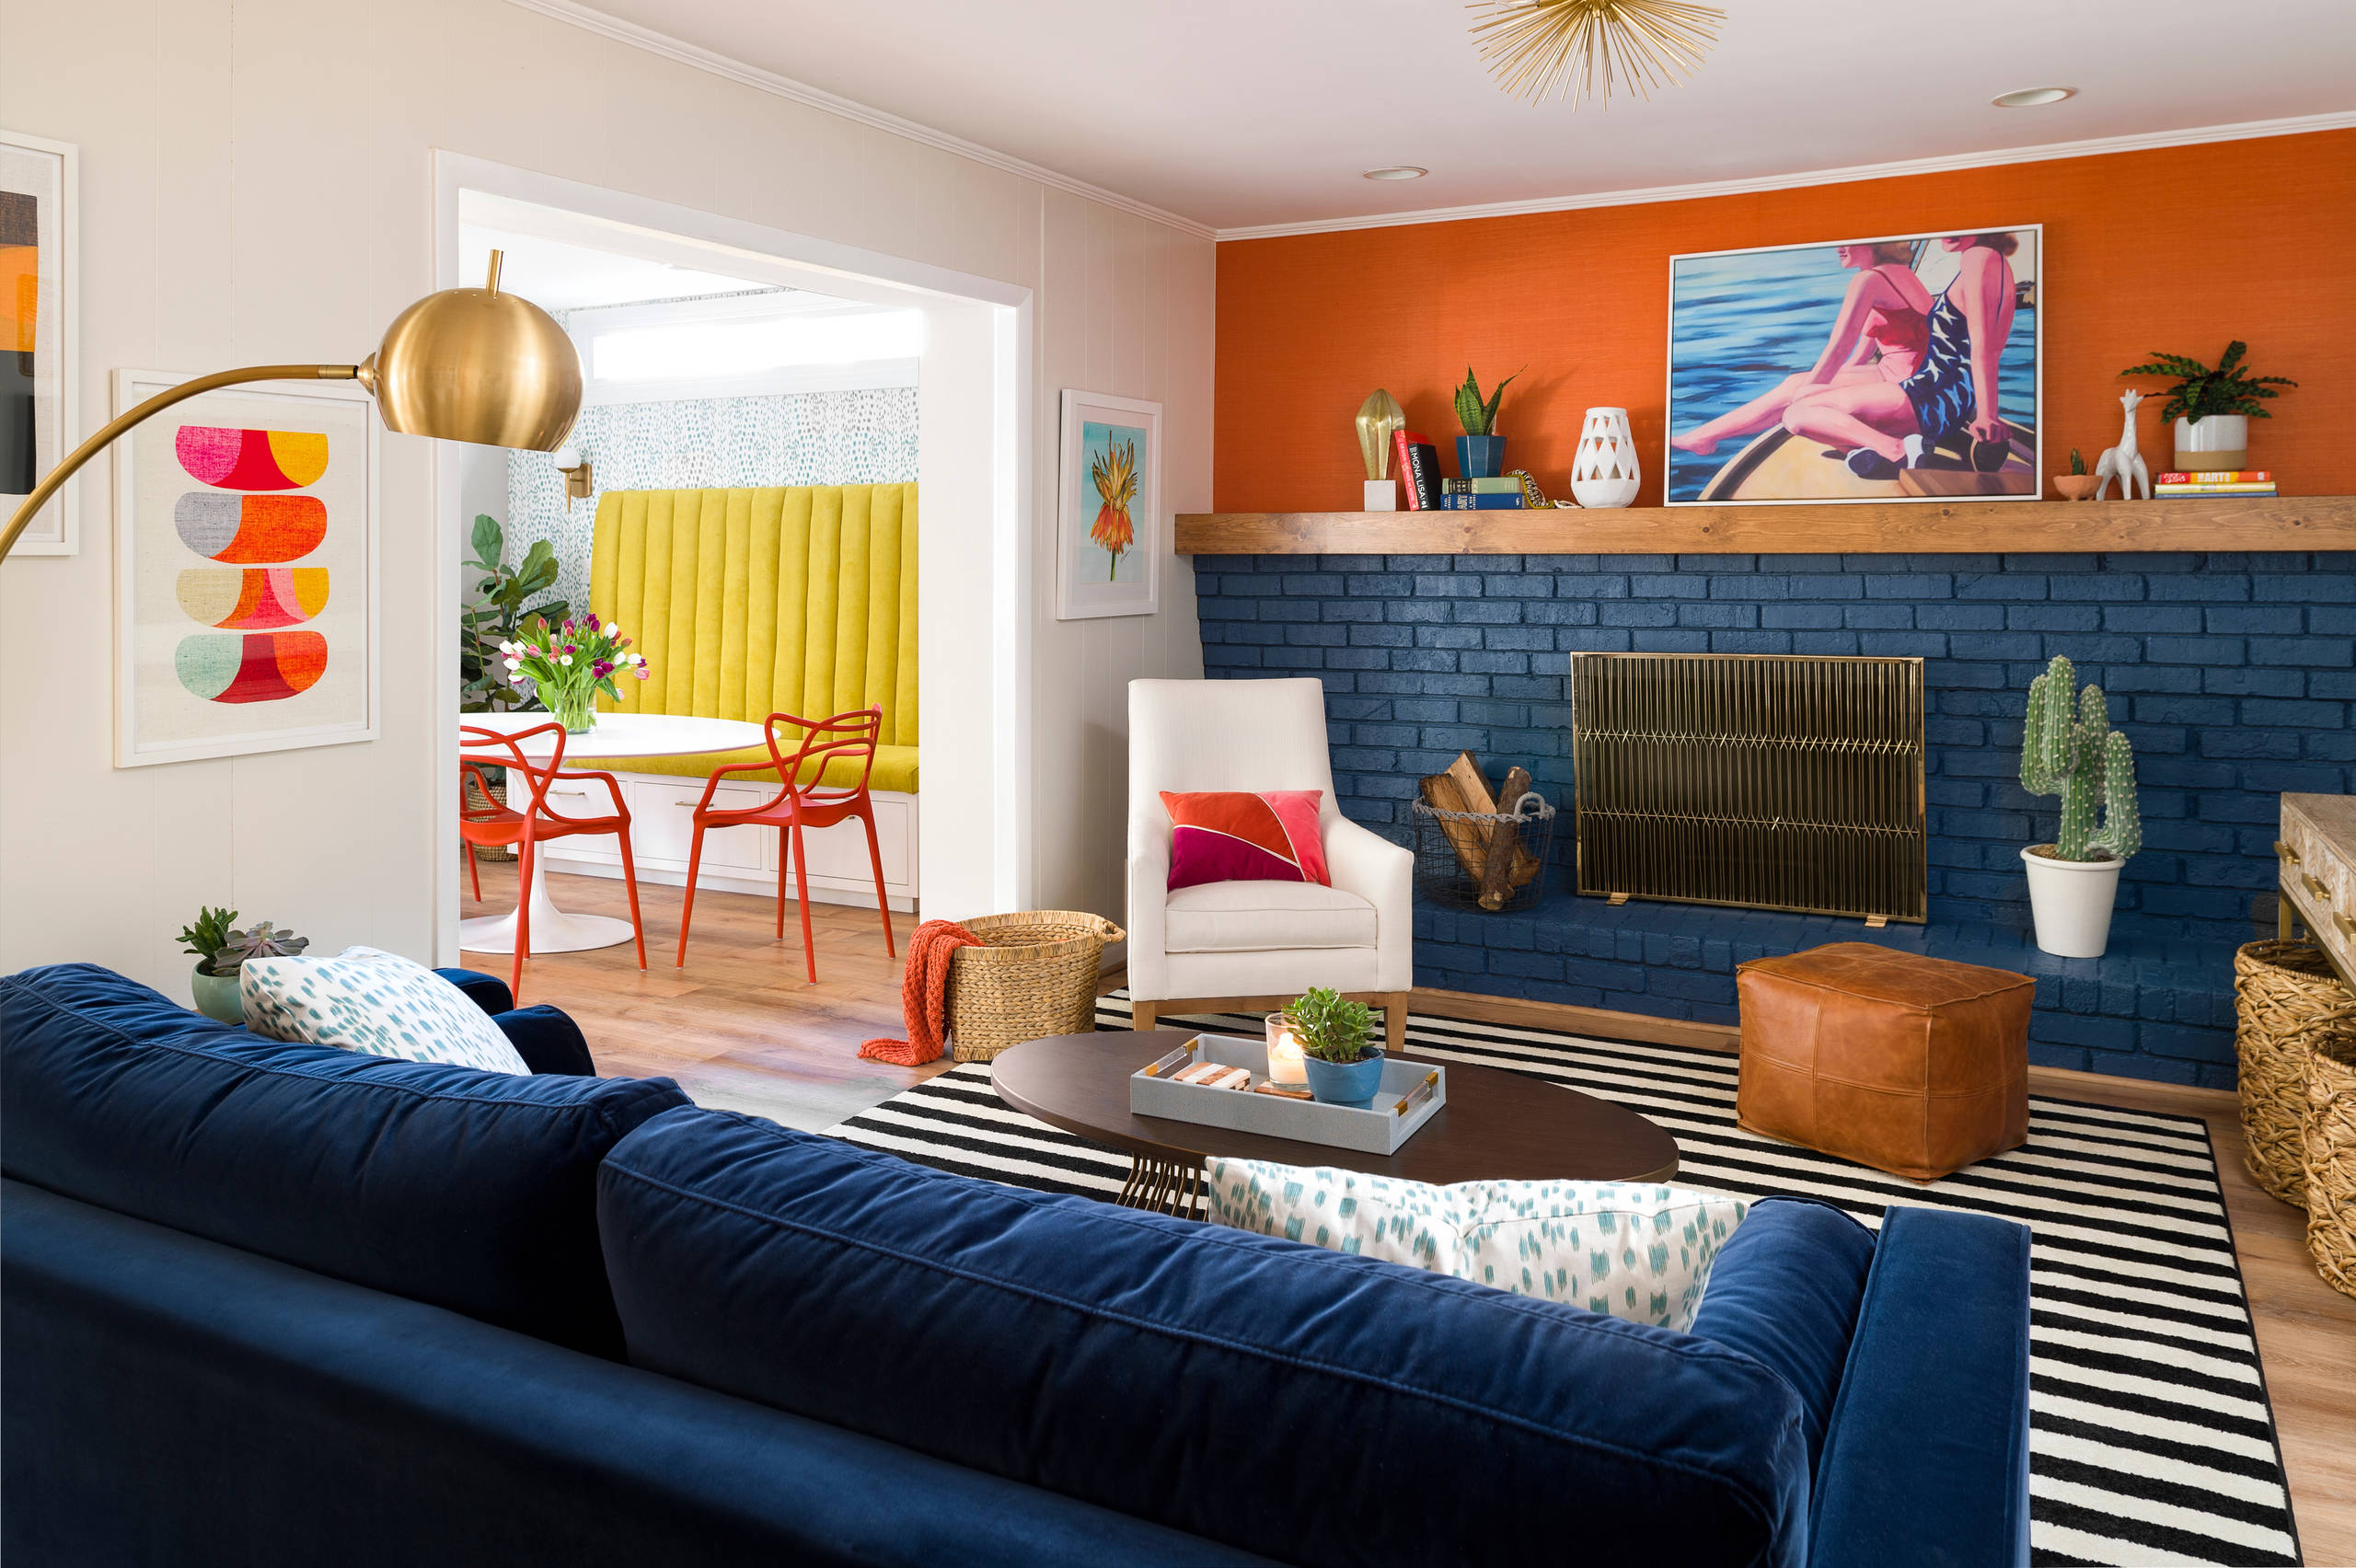 75 Beautiful Living Room With Orange Walls Pictures Ideas January